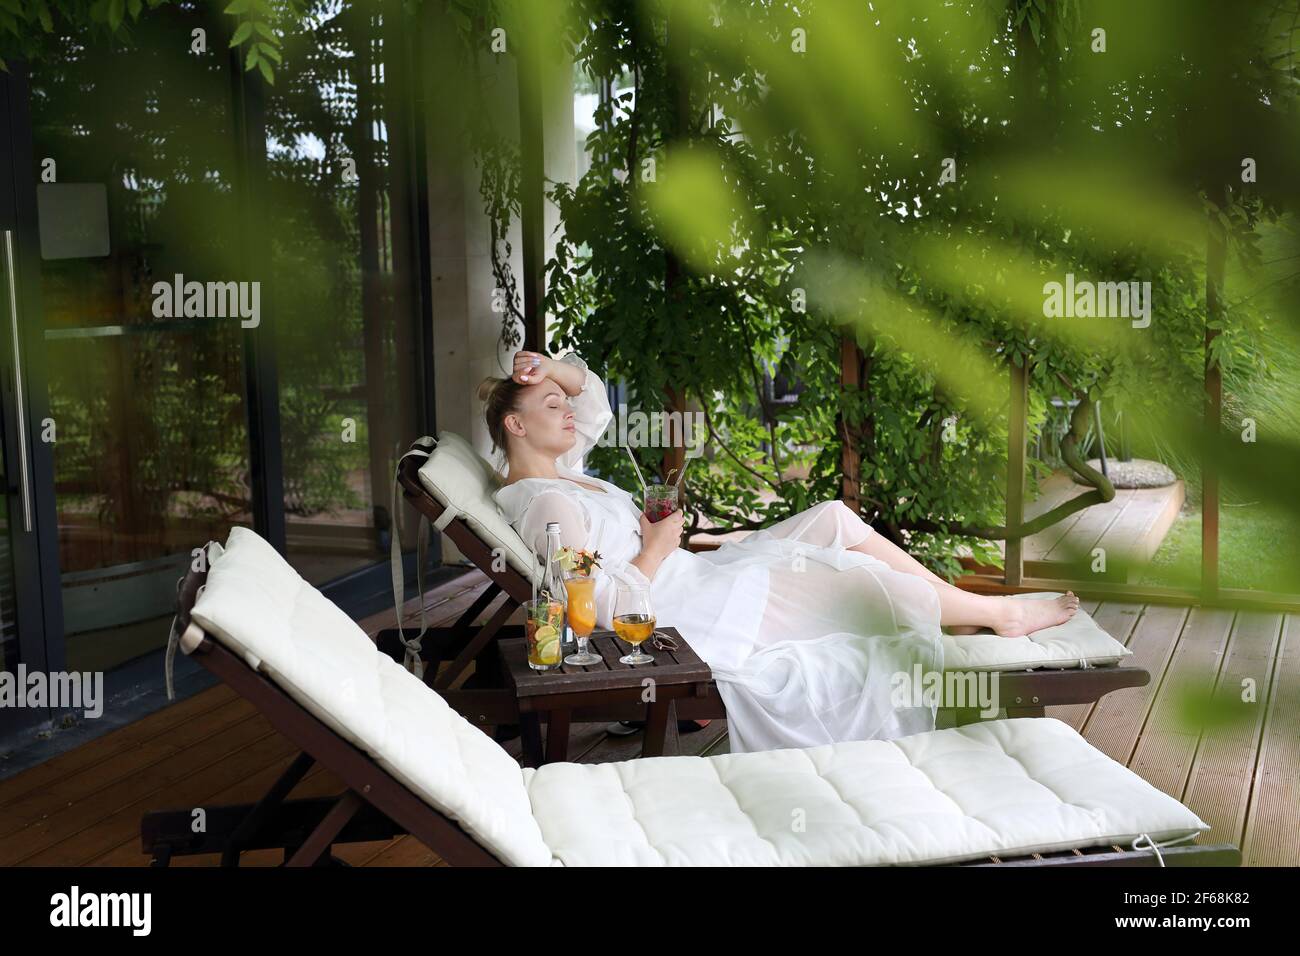 Woman relaxing at the spa. Relax in the garden. Young woman relaxes sitting on a hammock in the green garden. Stock Photo